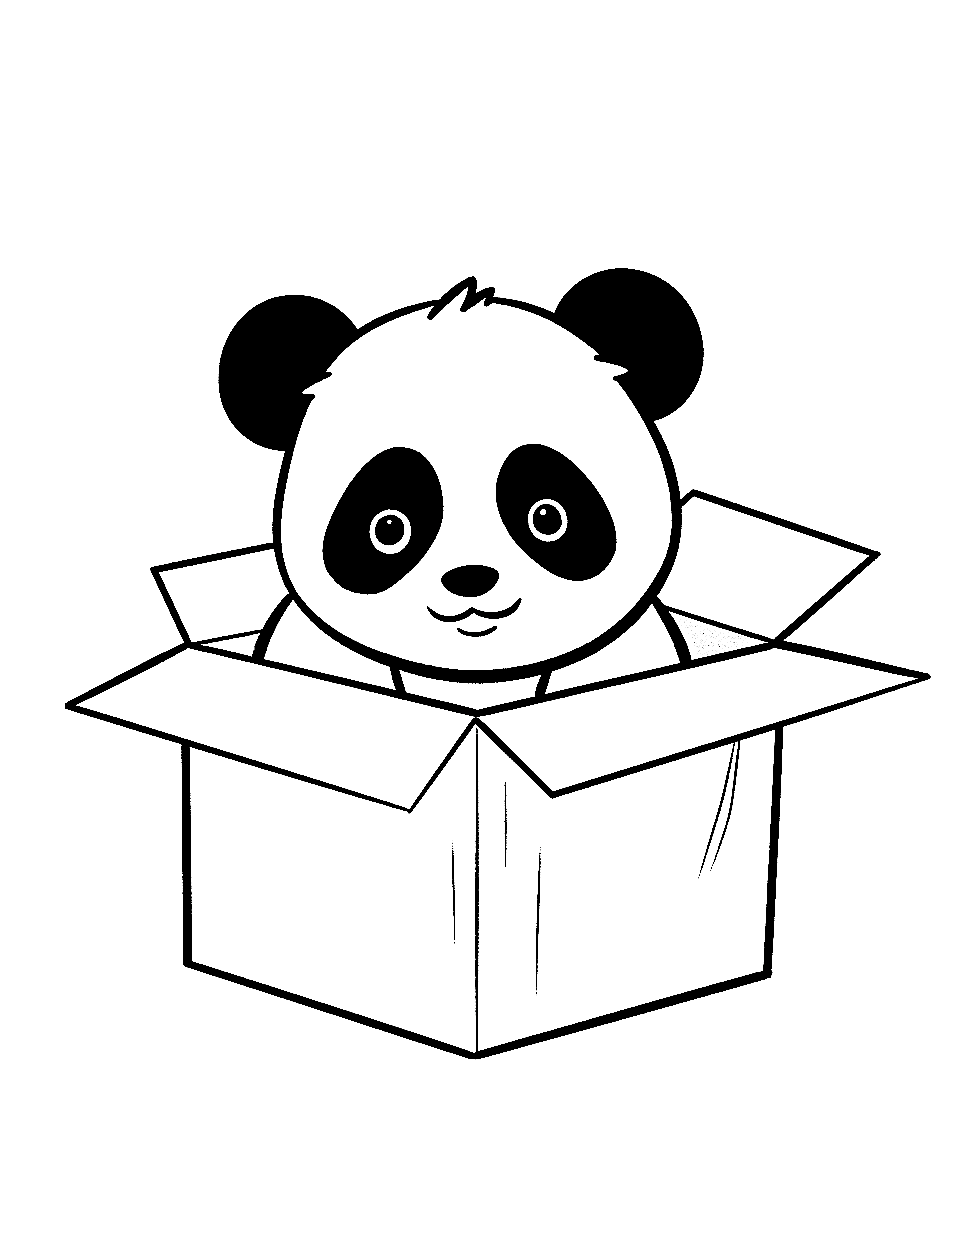 Panda in a Box Coloring Page - A surprised-looking panda sitting inside a slightly too-small cardboard box.